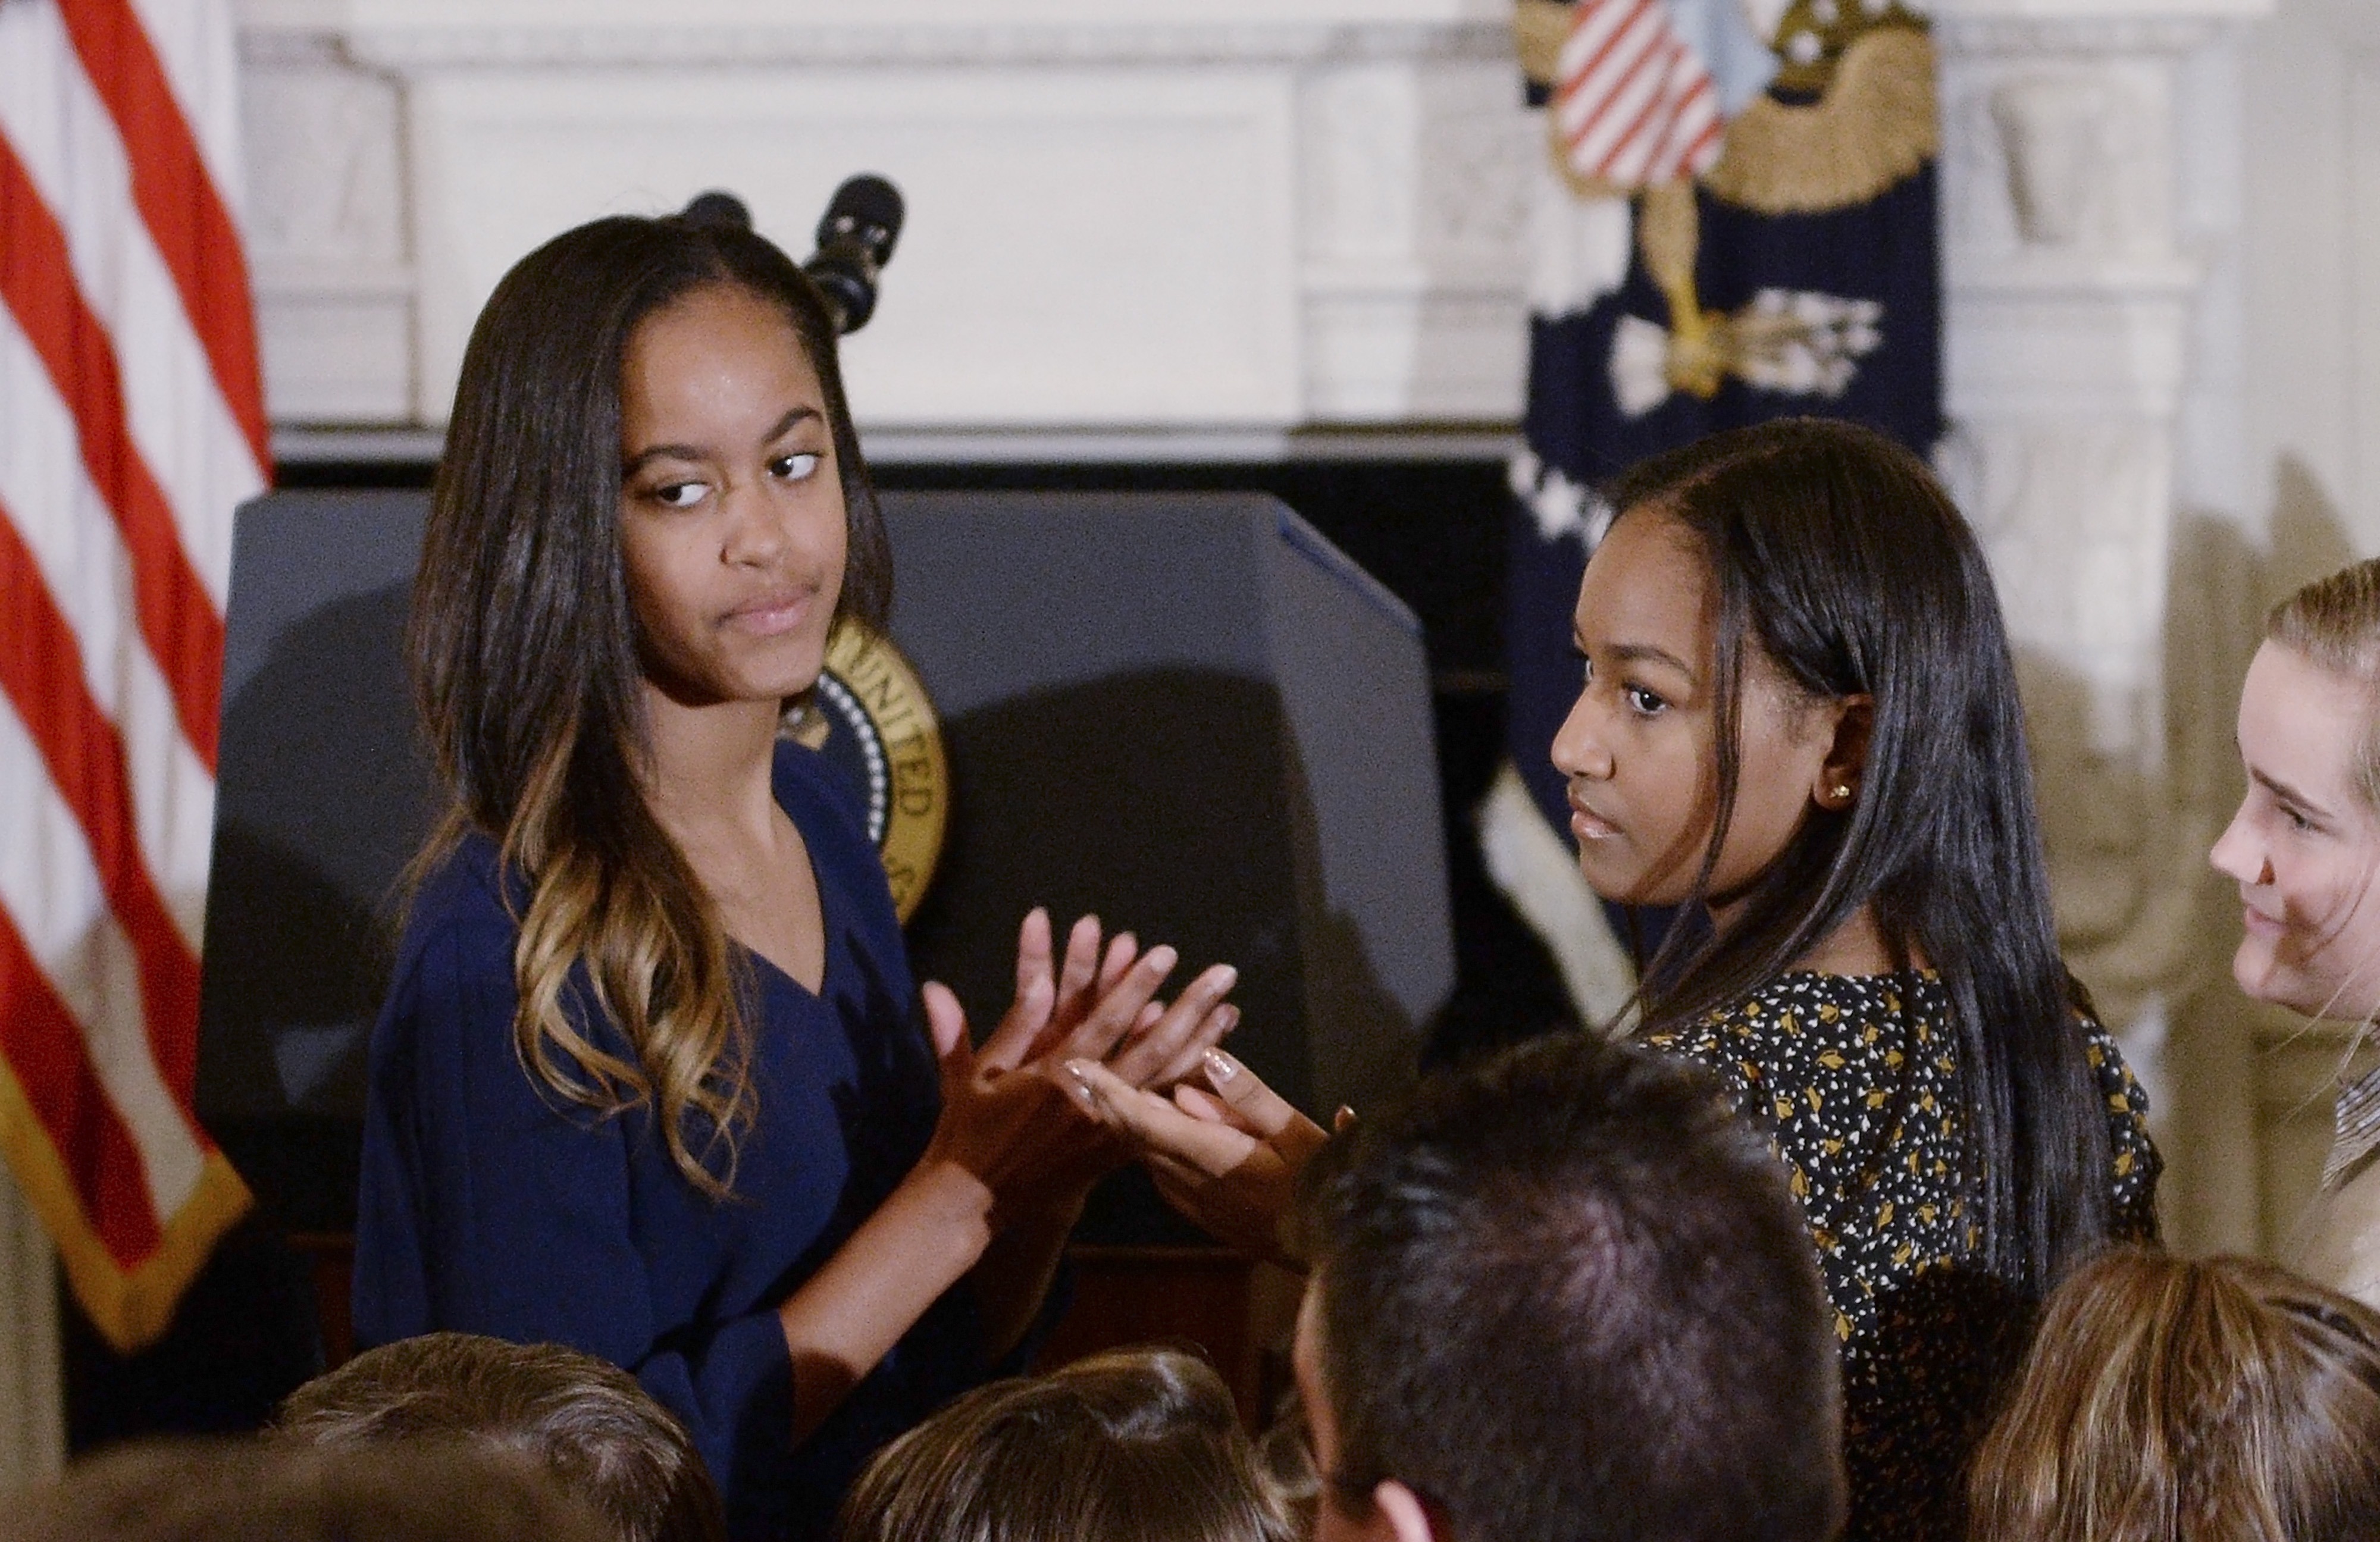 Malia and Sasha Obama at a ceremony presenting the Medal of Freedom to Vice-President Joe Biden in Washington, DC on January 12, 2017 | Source: Getty Images